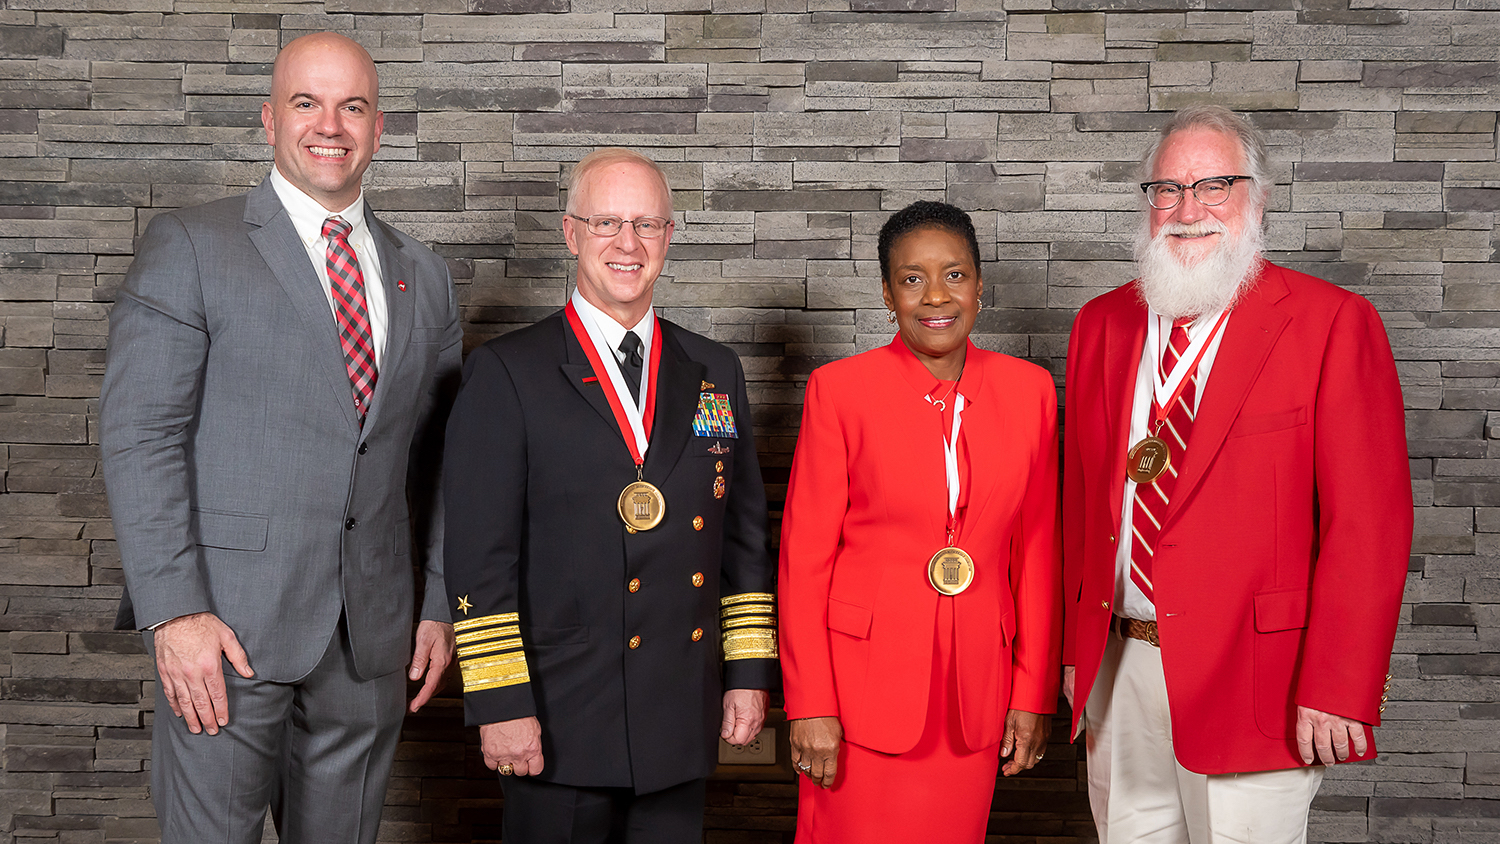 Dean Jim Pfaendtner, left, is shown with 2023 Distinguished Engineering Alumni Award recipients, from left, Admiral Daryl L. Caudle, Deborah Bell Young and Robert E. Troxler.